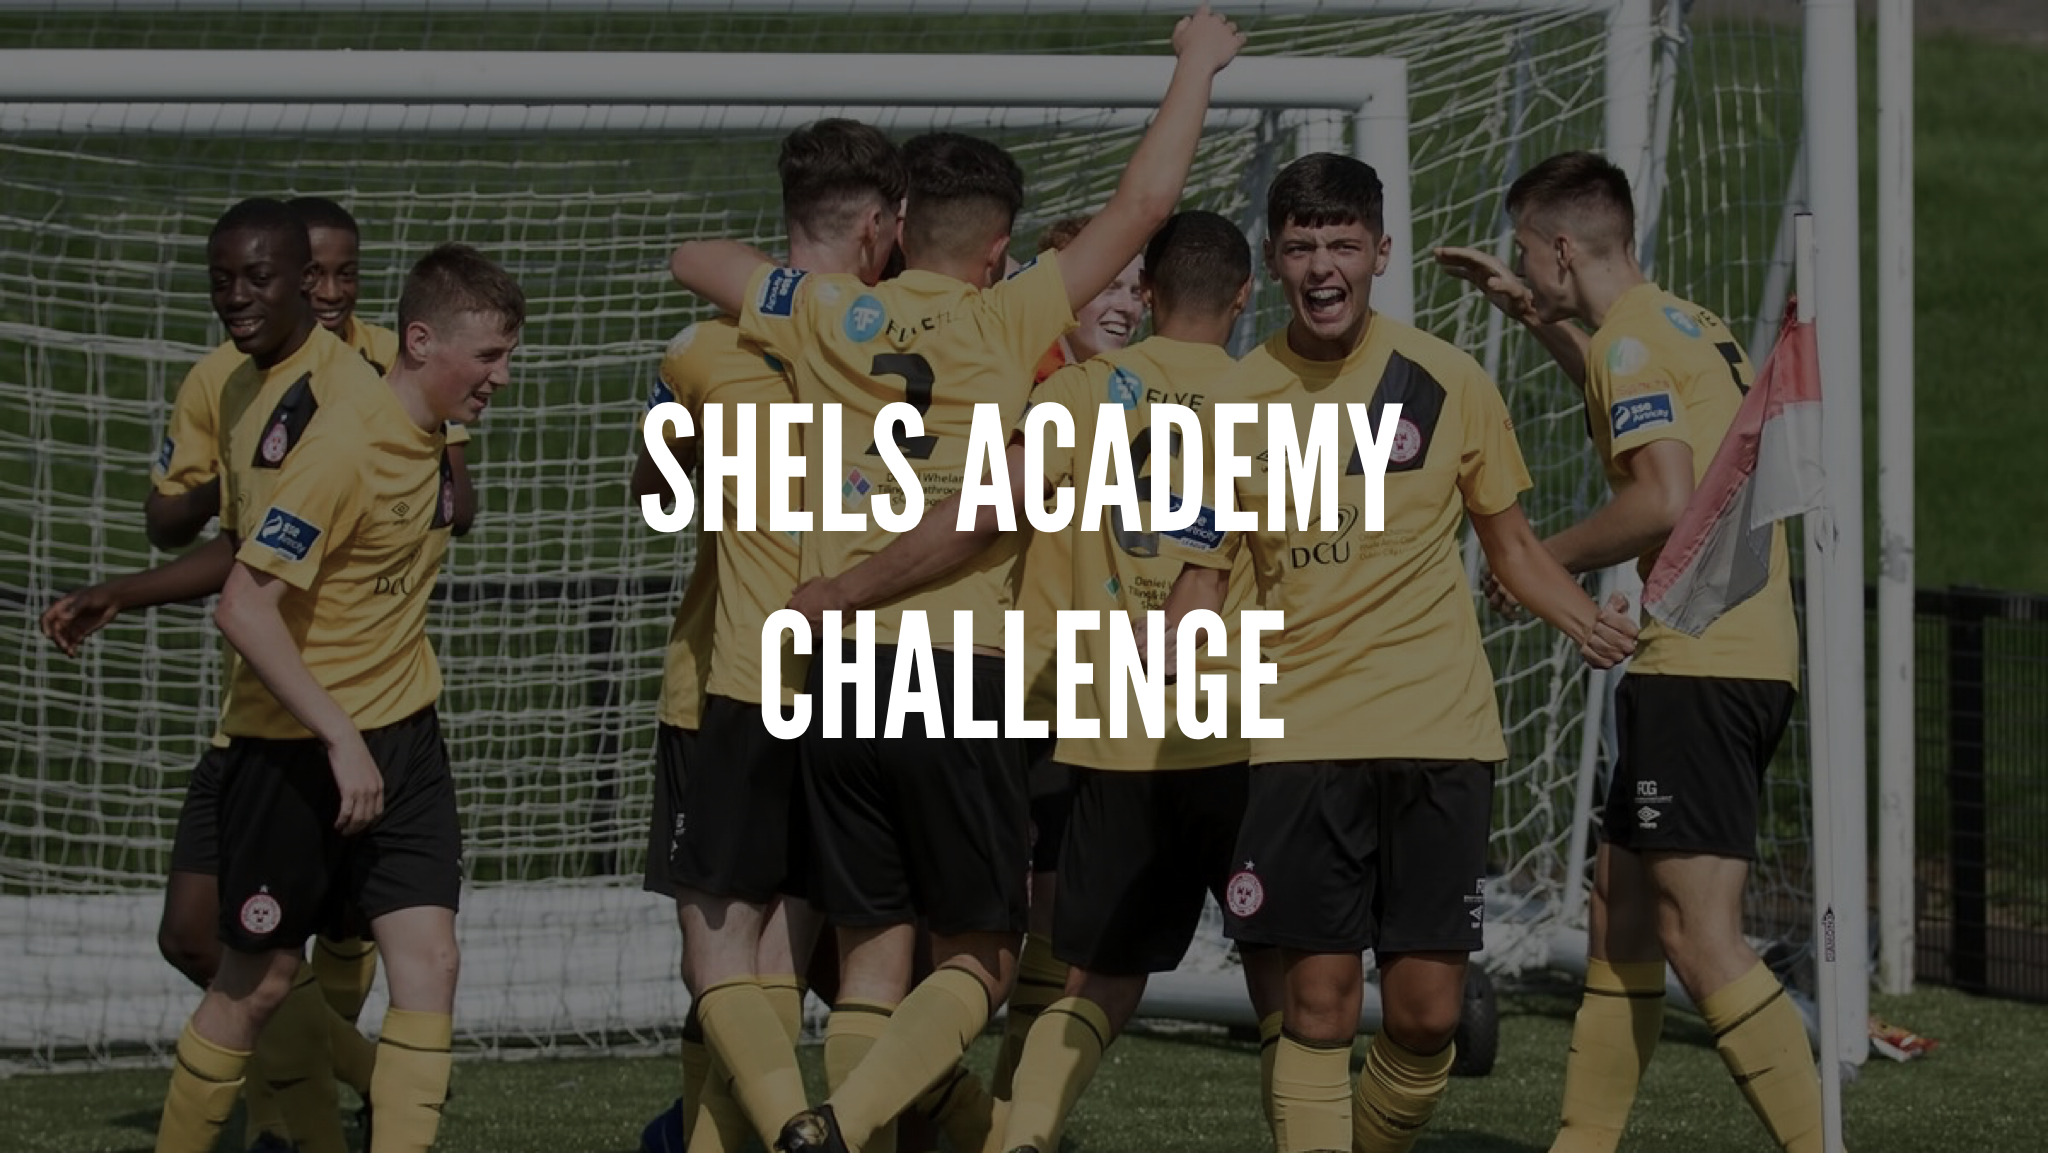 Shels Academy Challenge launched